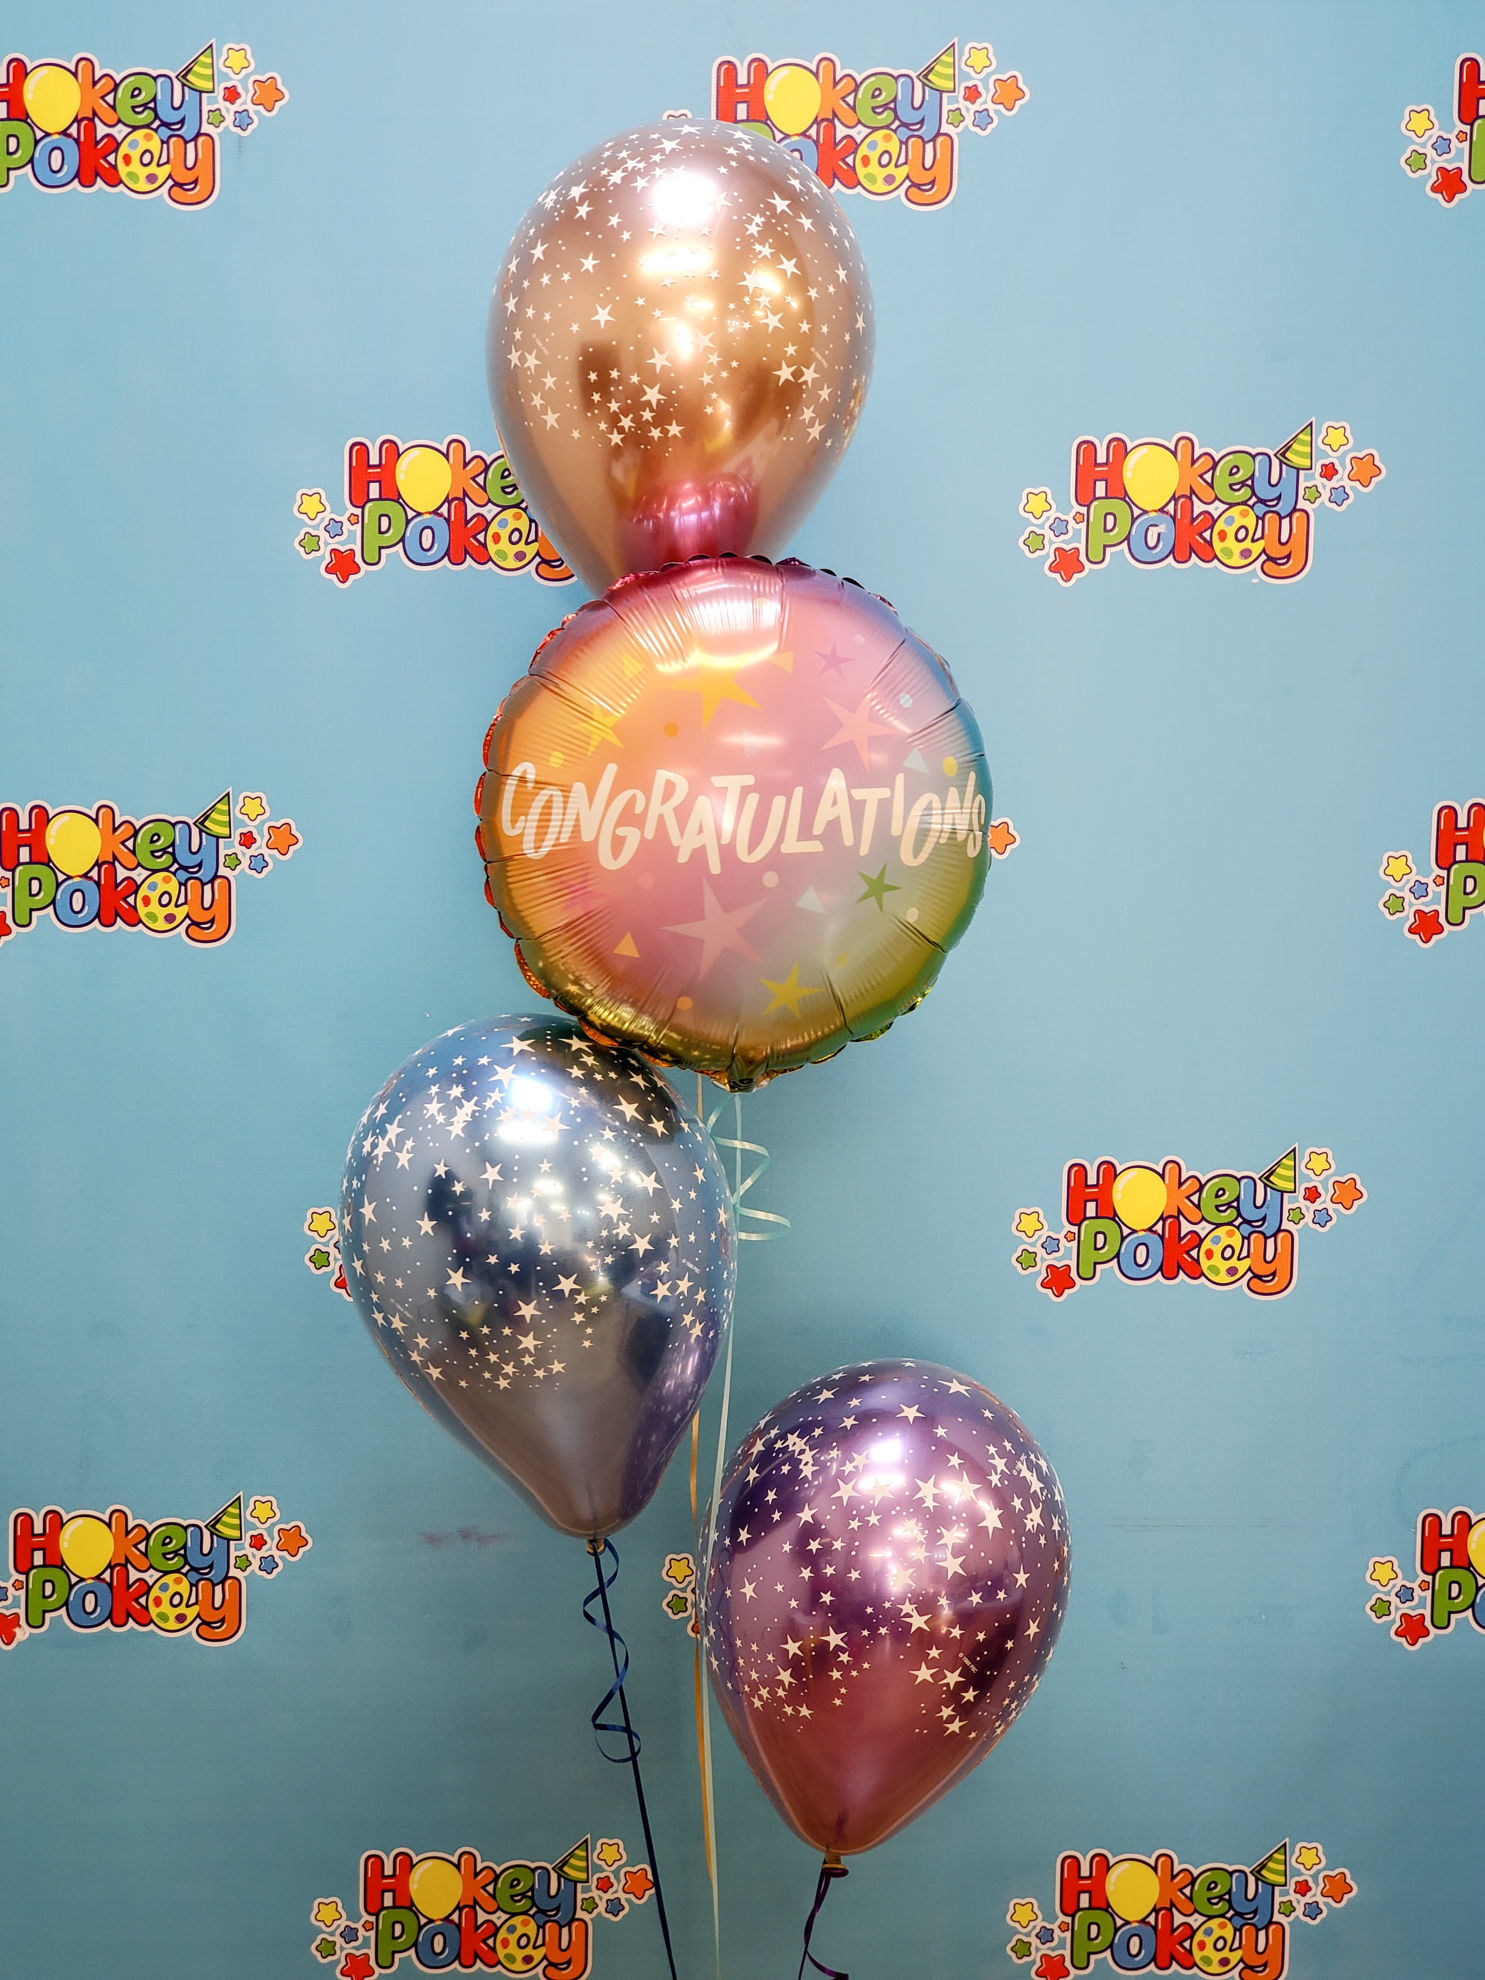 Picture of Congratulations Ombre & Stars Balloon Bouquet (5 pc)